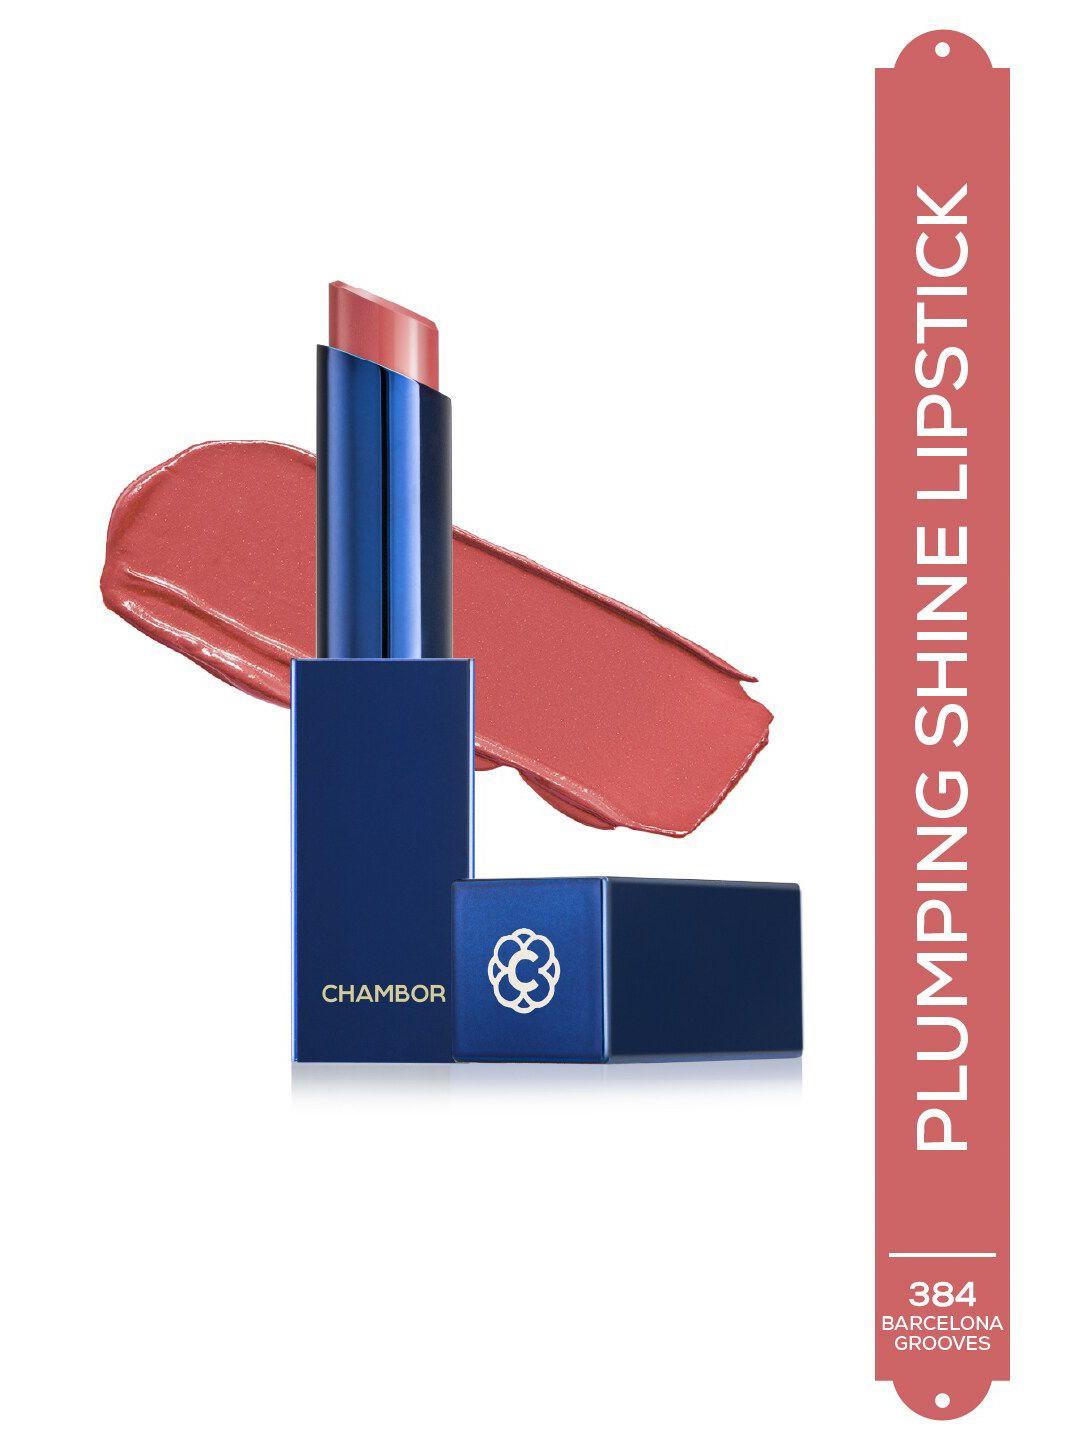 chambor tres shine plump long-lasting lipstick with shea butter - barcelona grooves 384